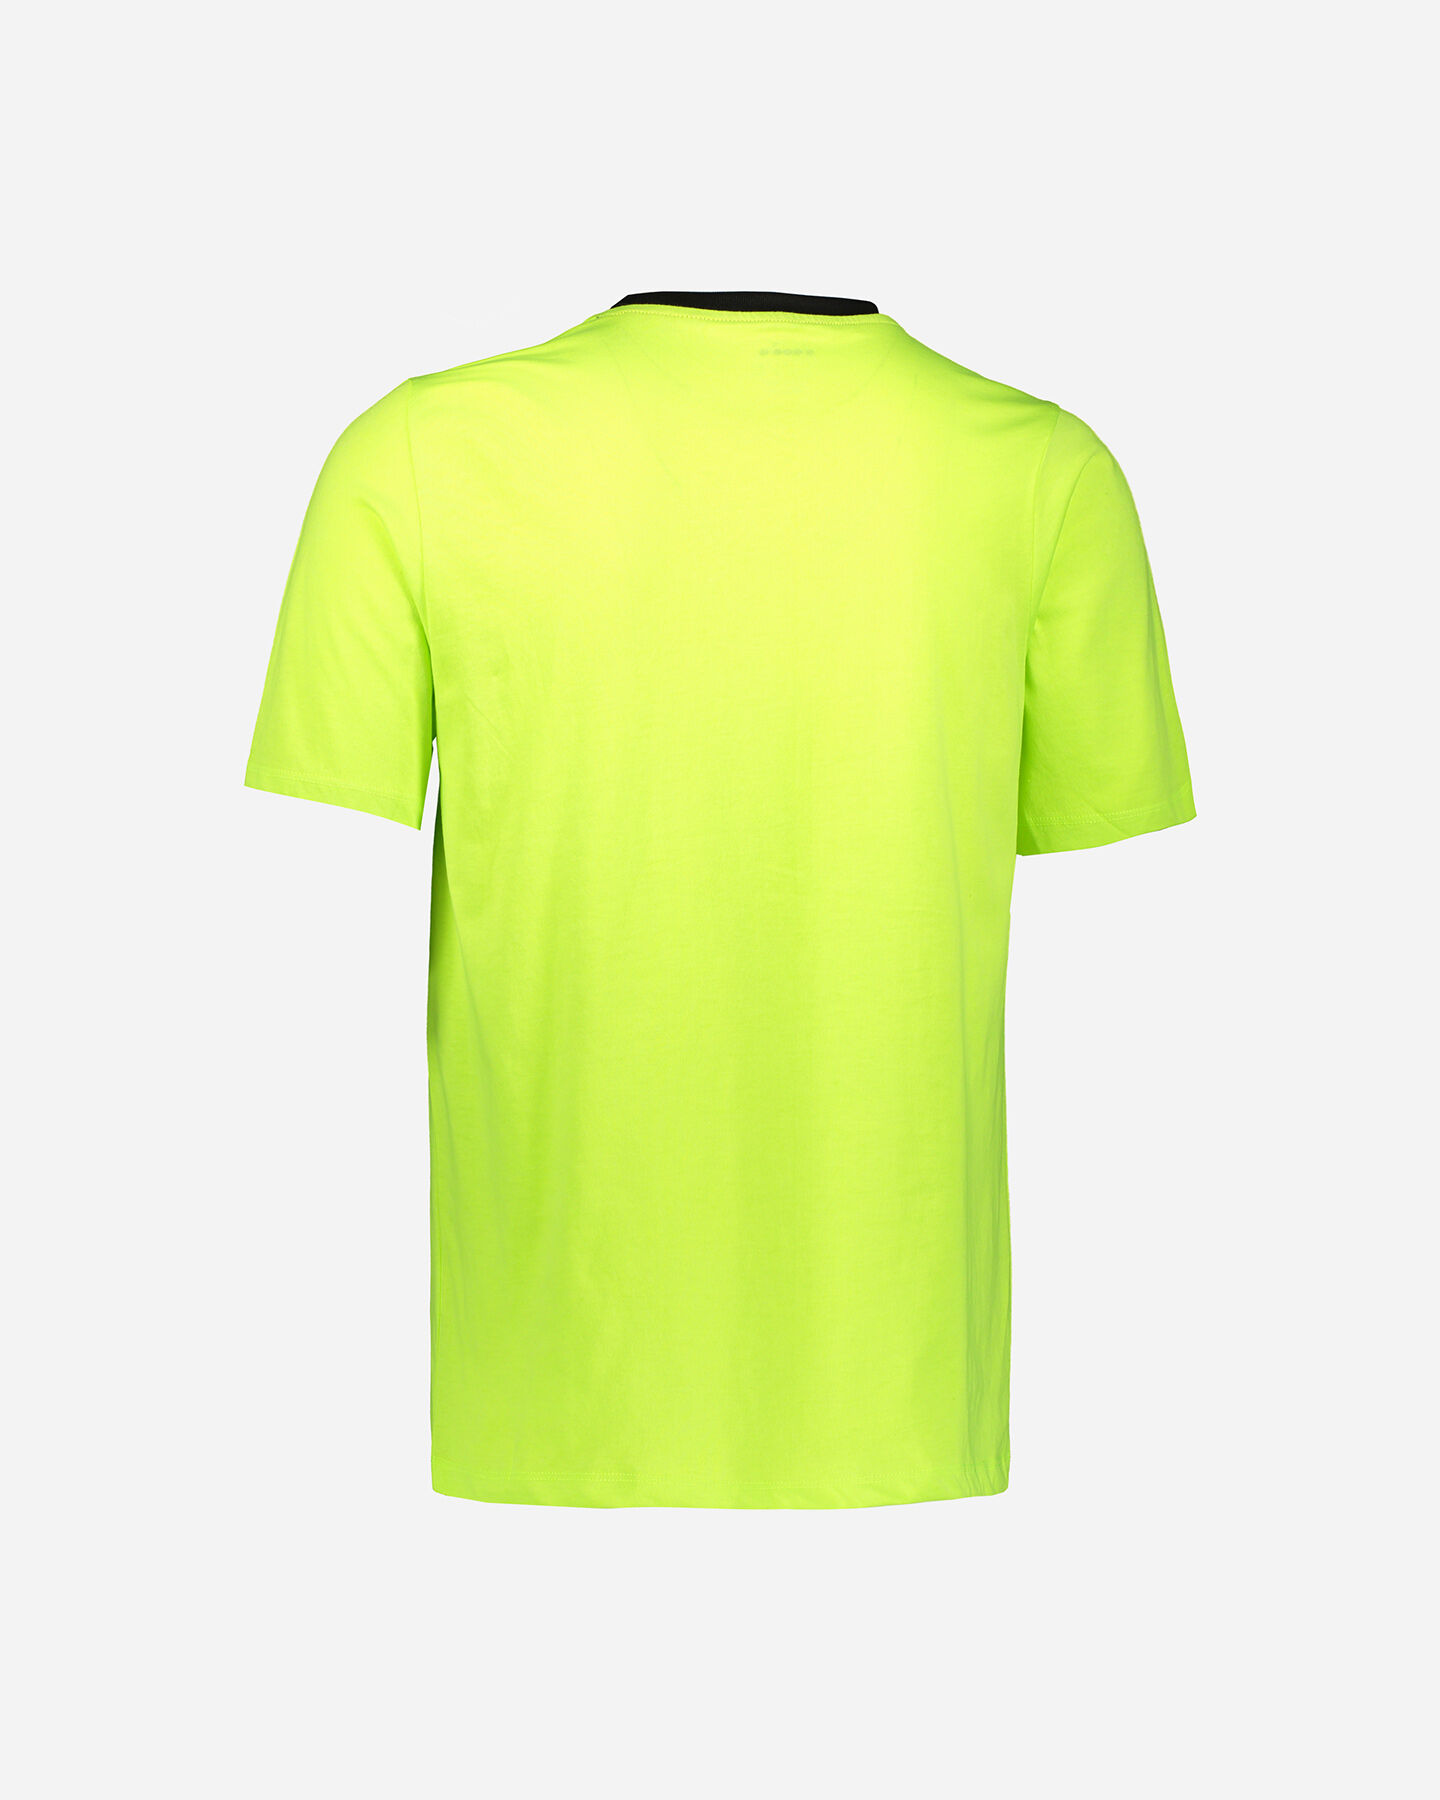  T-Shirt running DIADORA PLUS BE ONE M S5170770|97015|S scatto 1